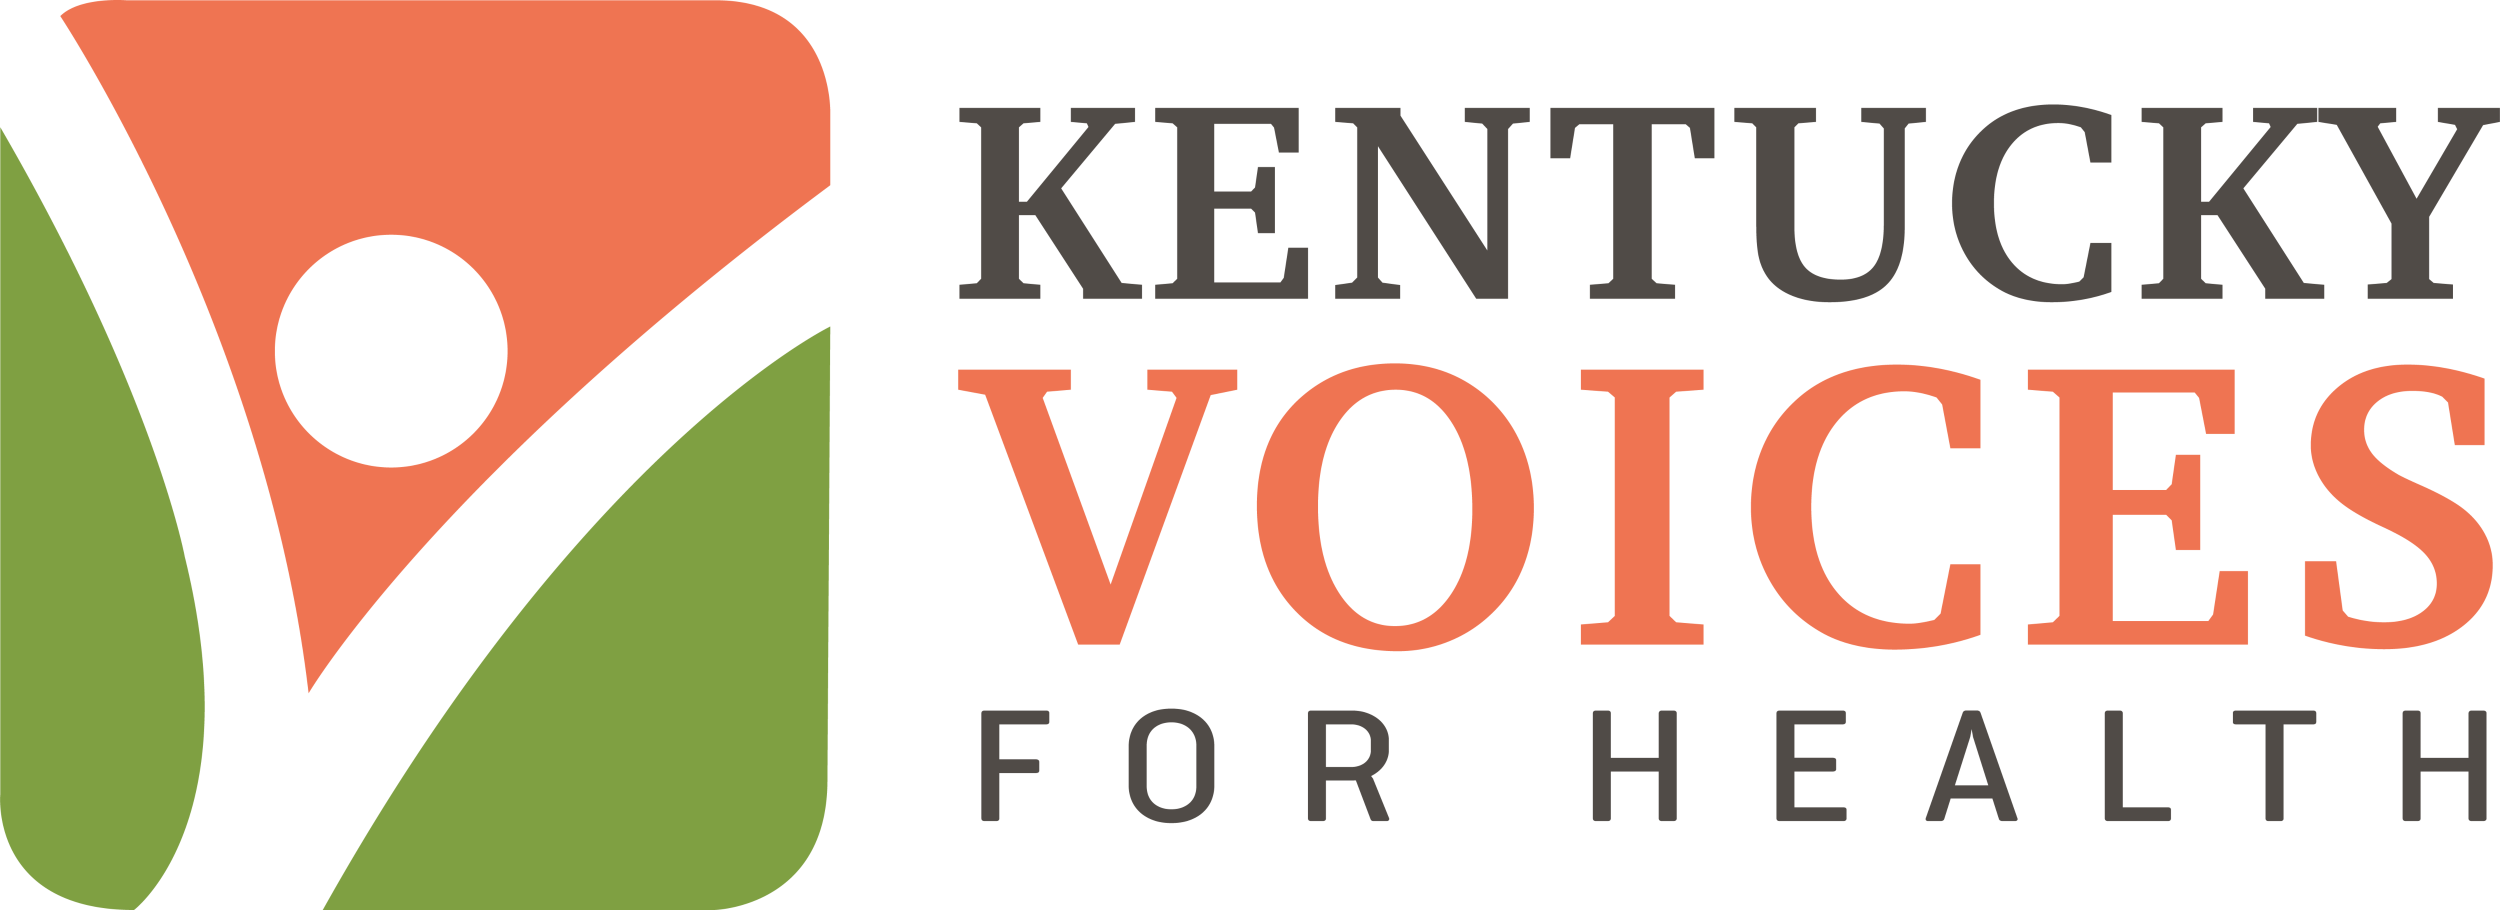 Kentucky Voices for Health